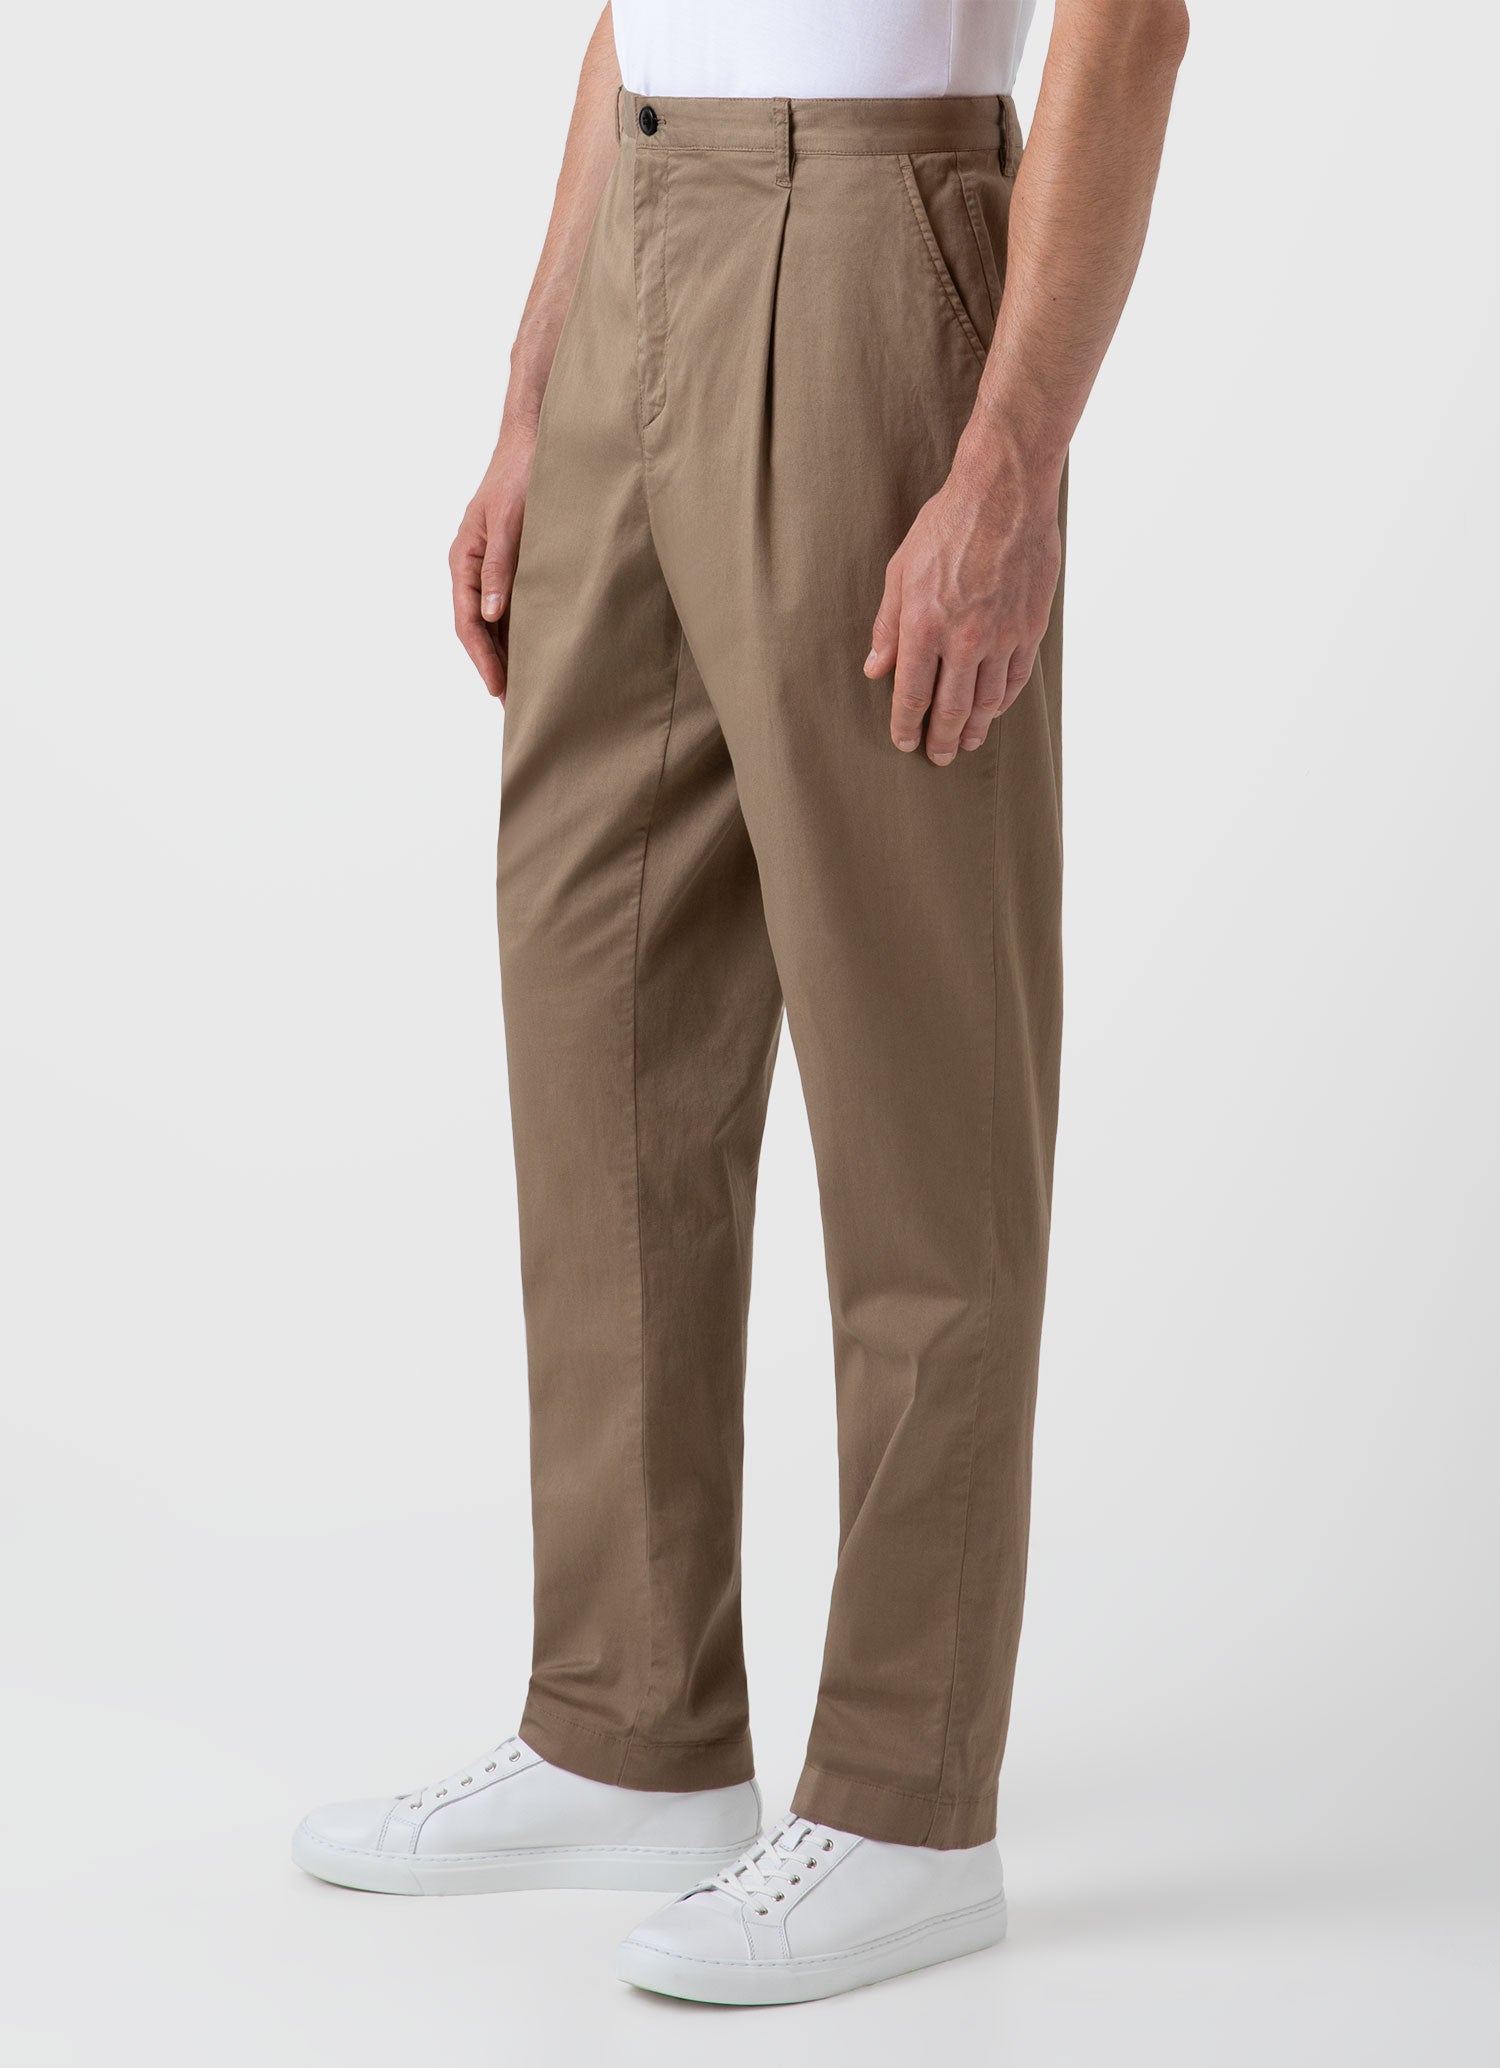 Cool 18 Pro Pant| Classic Fit, Pleat Front, Stretch, No Iron | Haggar.com